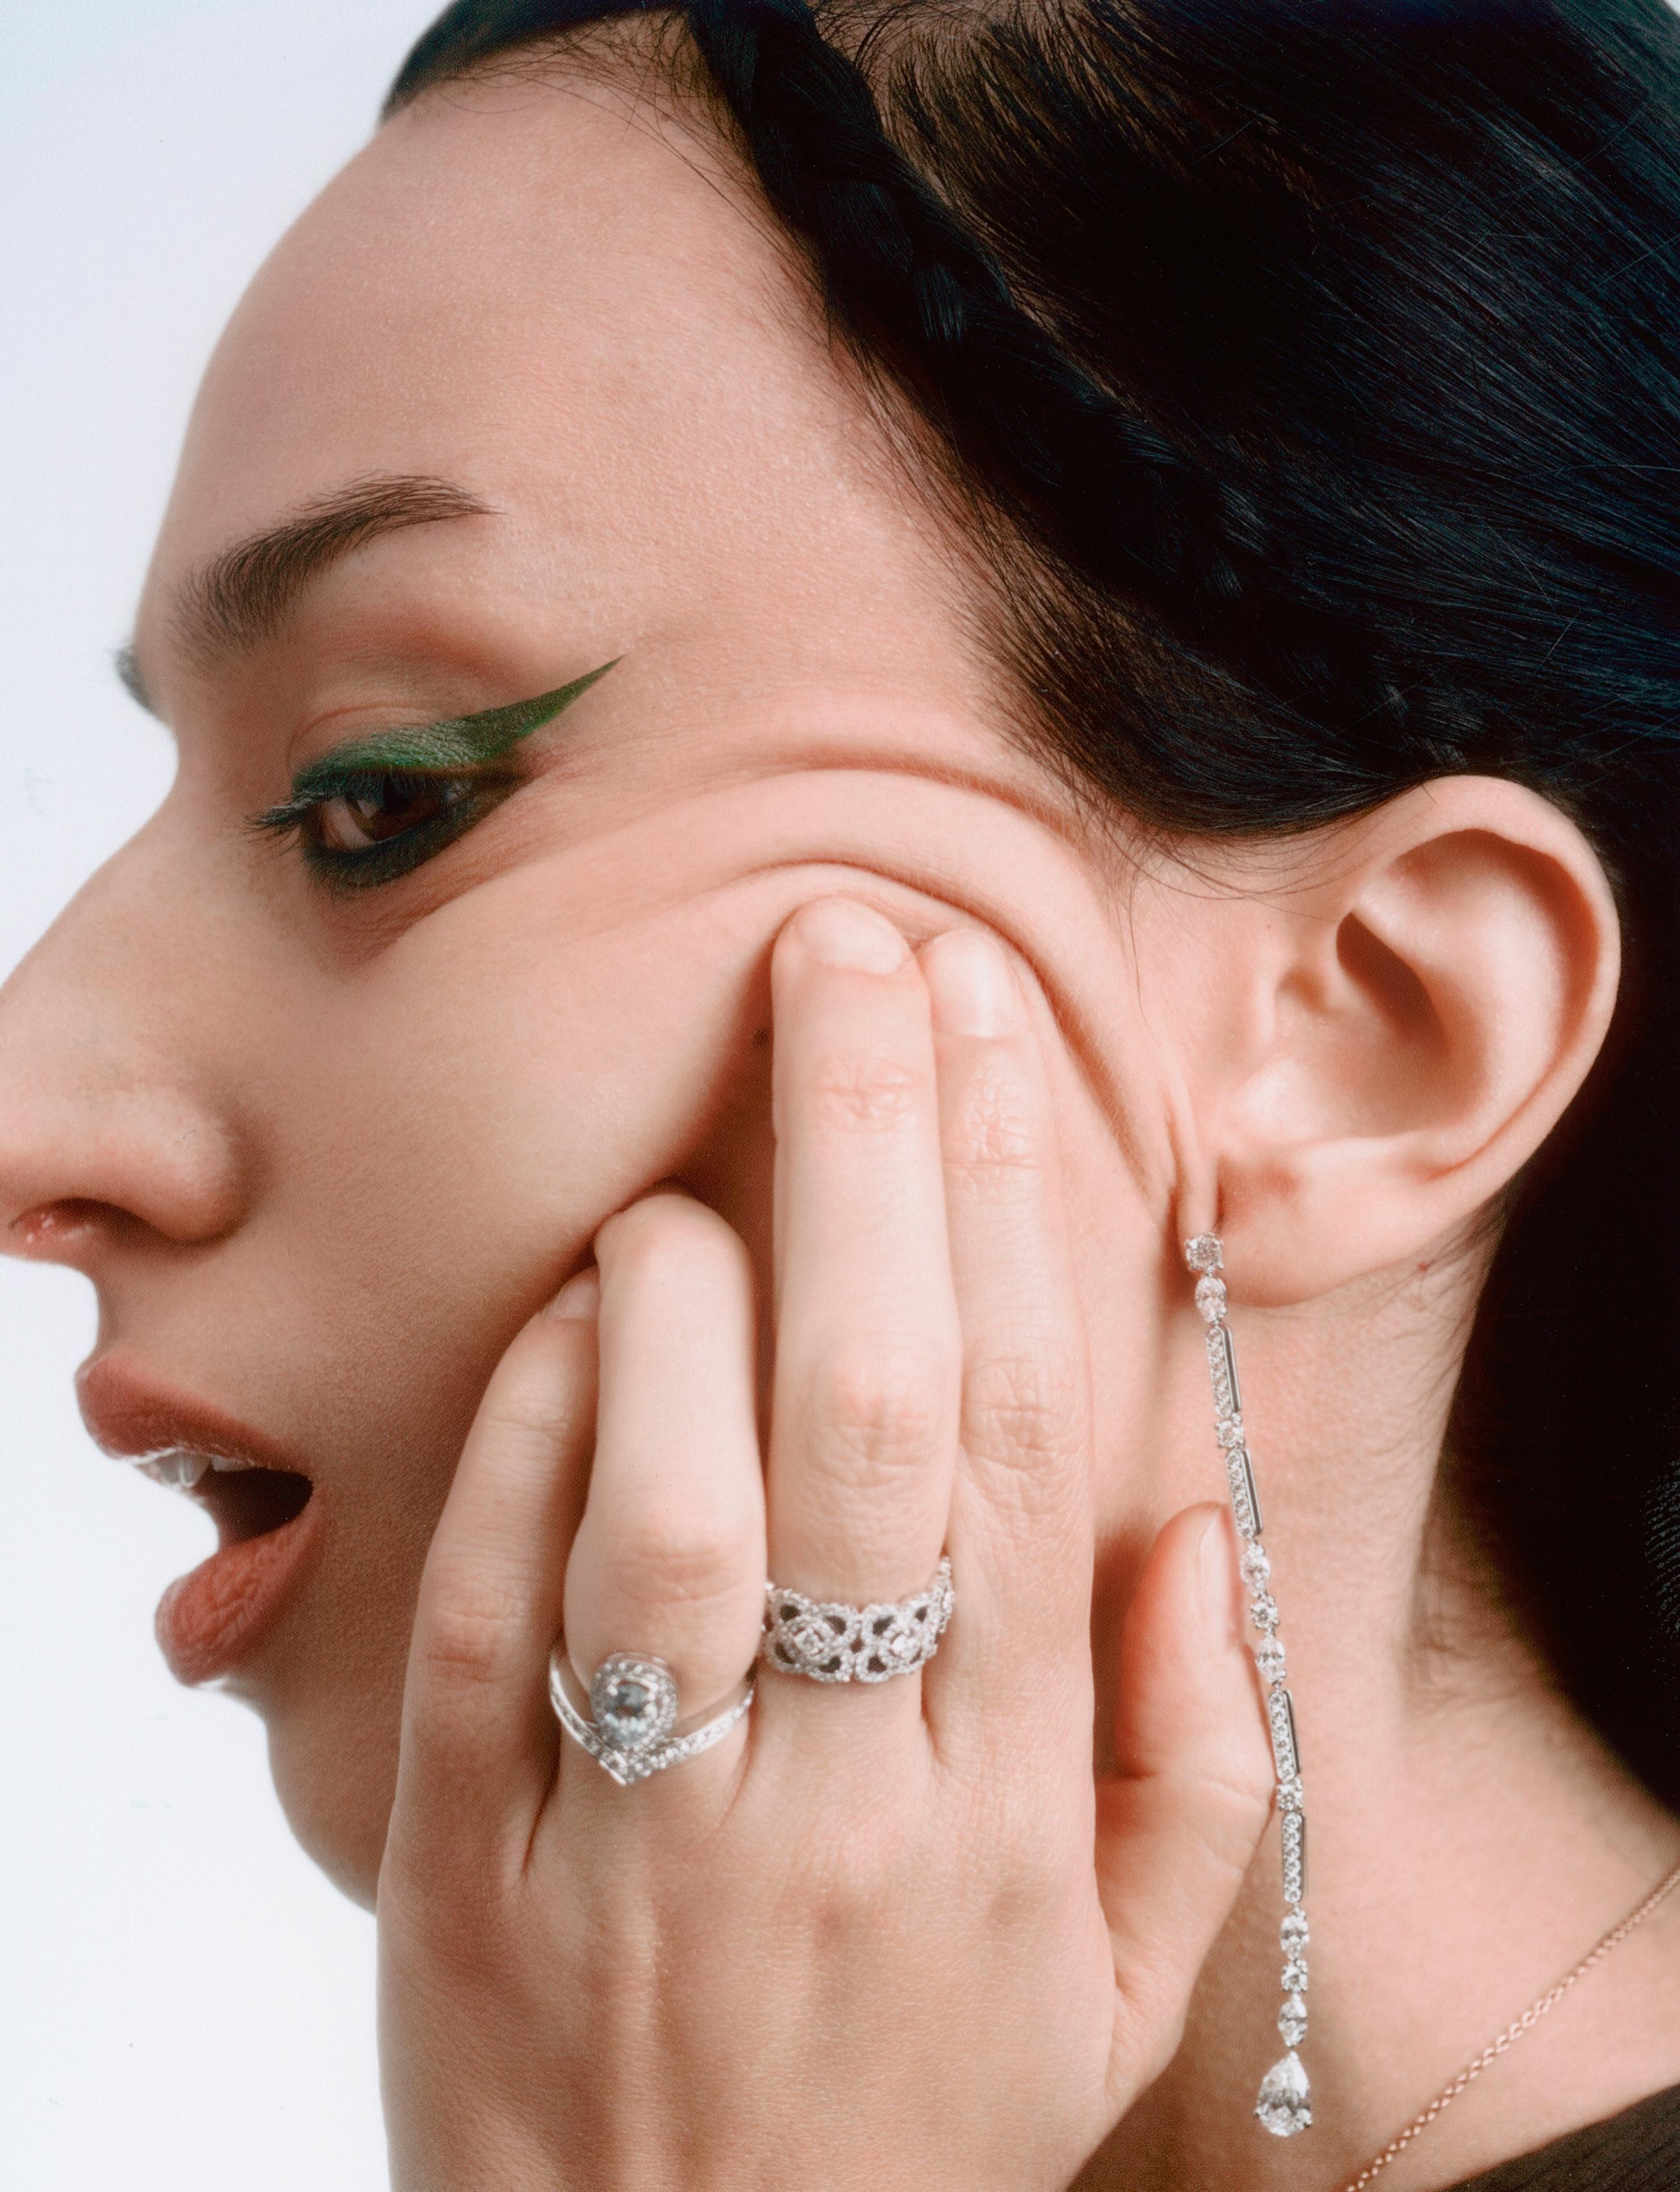 Patricia wears De Beers, Chaumet and Balenciaga, shot in London